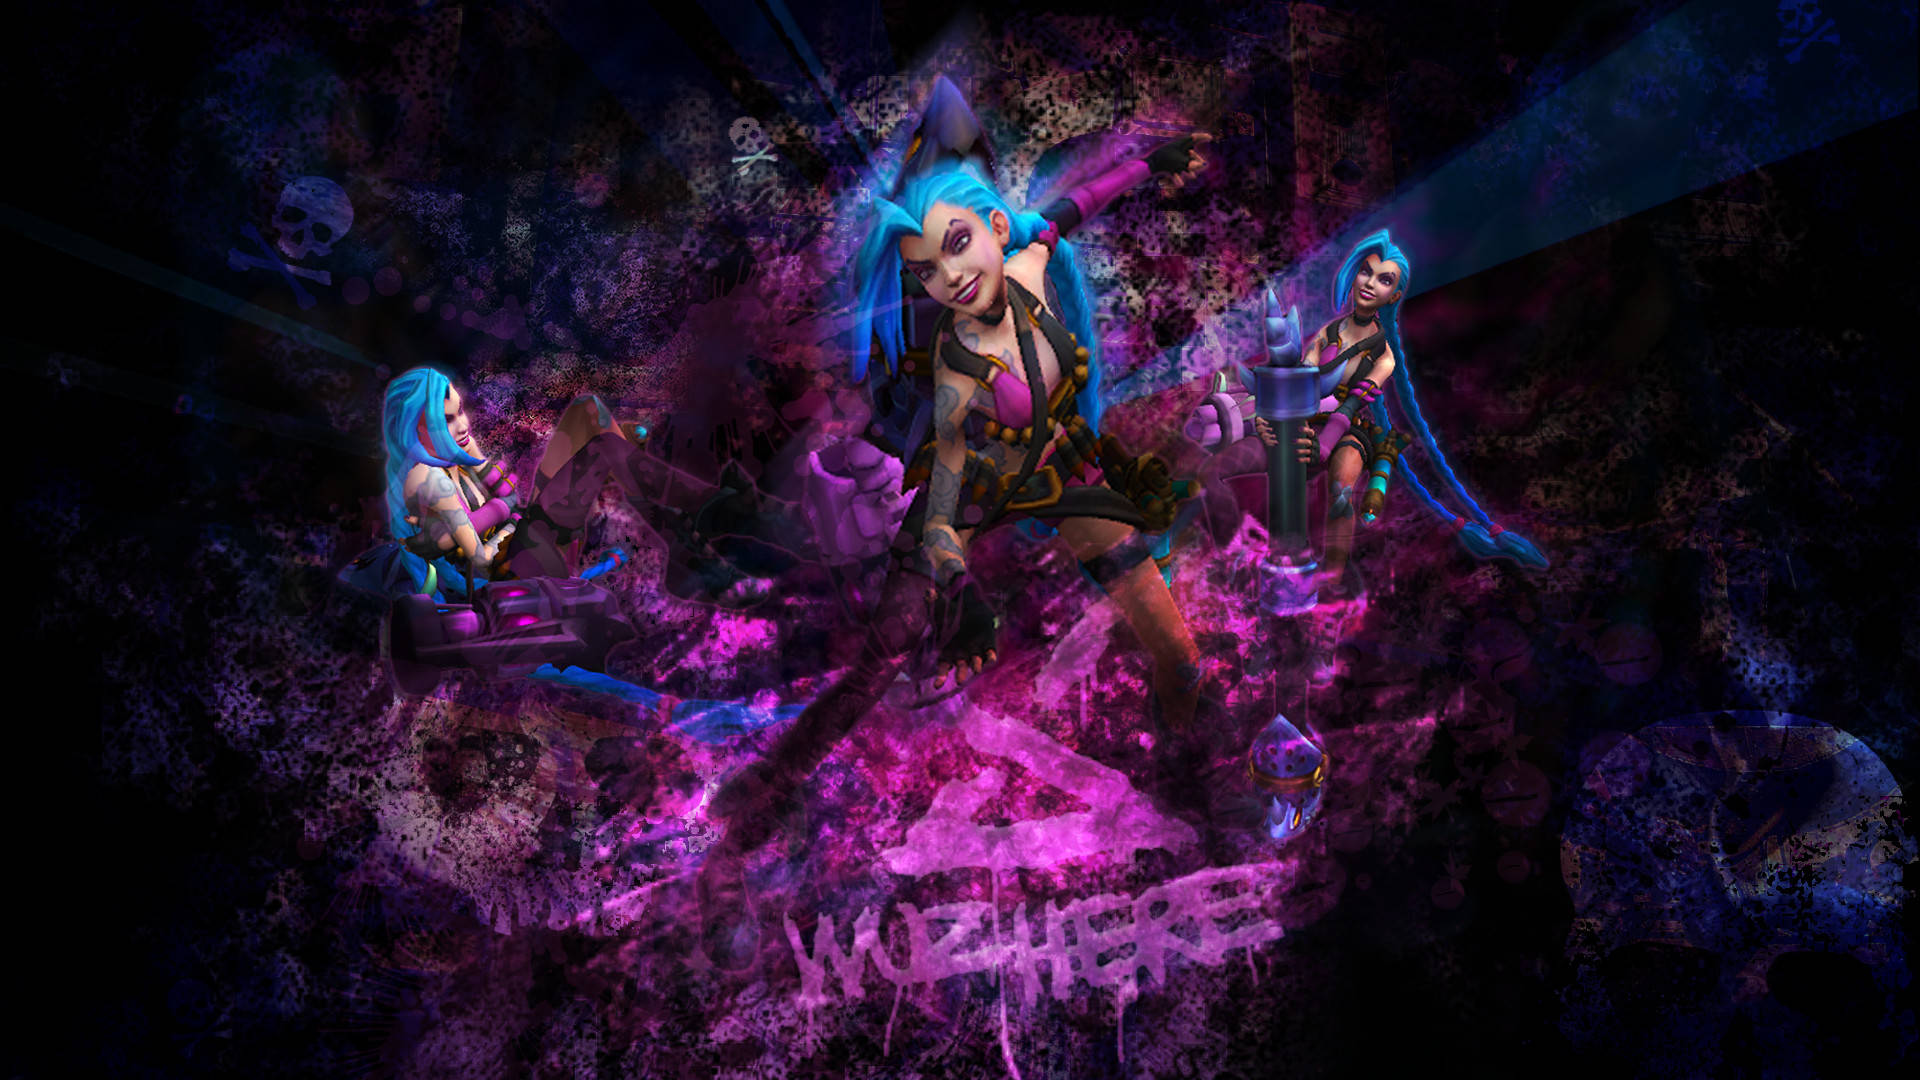 Caption: Jinx, the Loose Cannon In Action Wallpaper